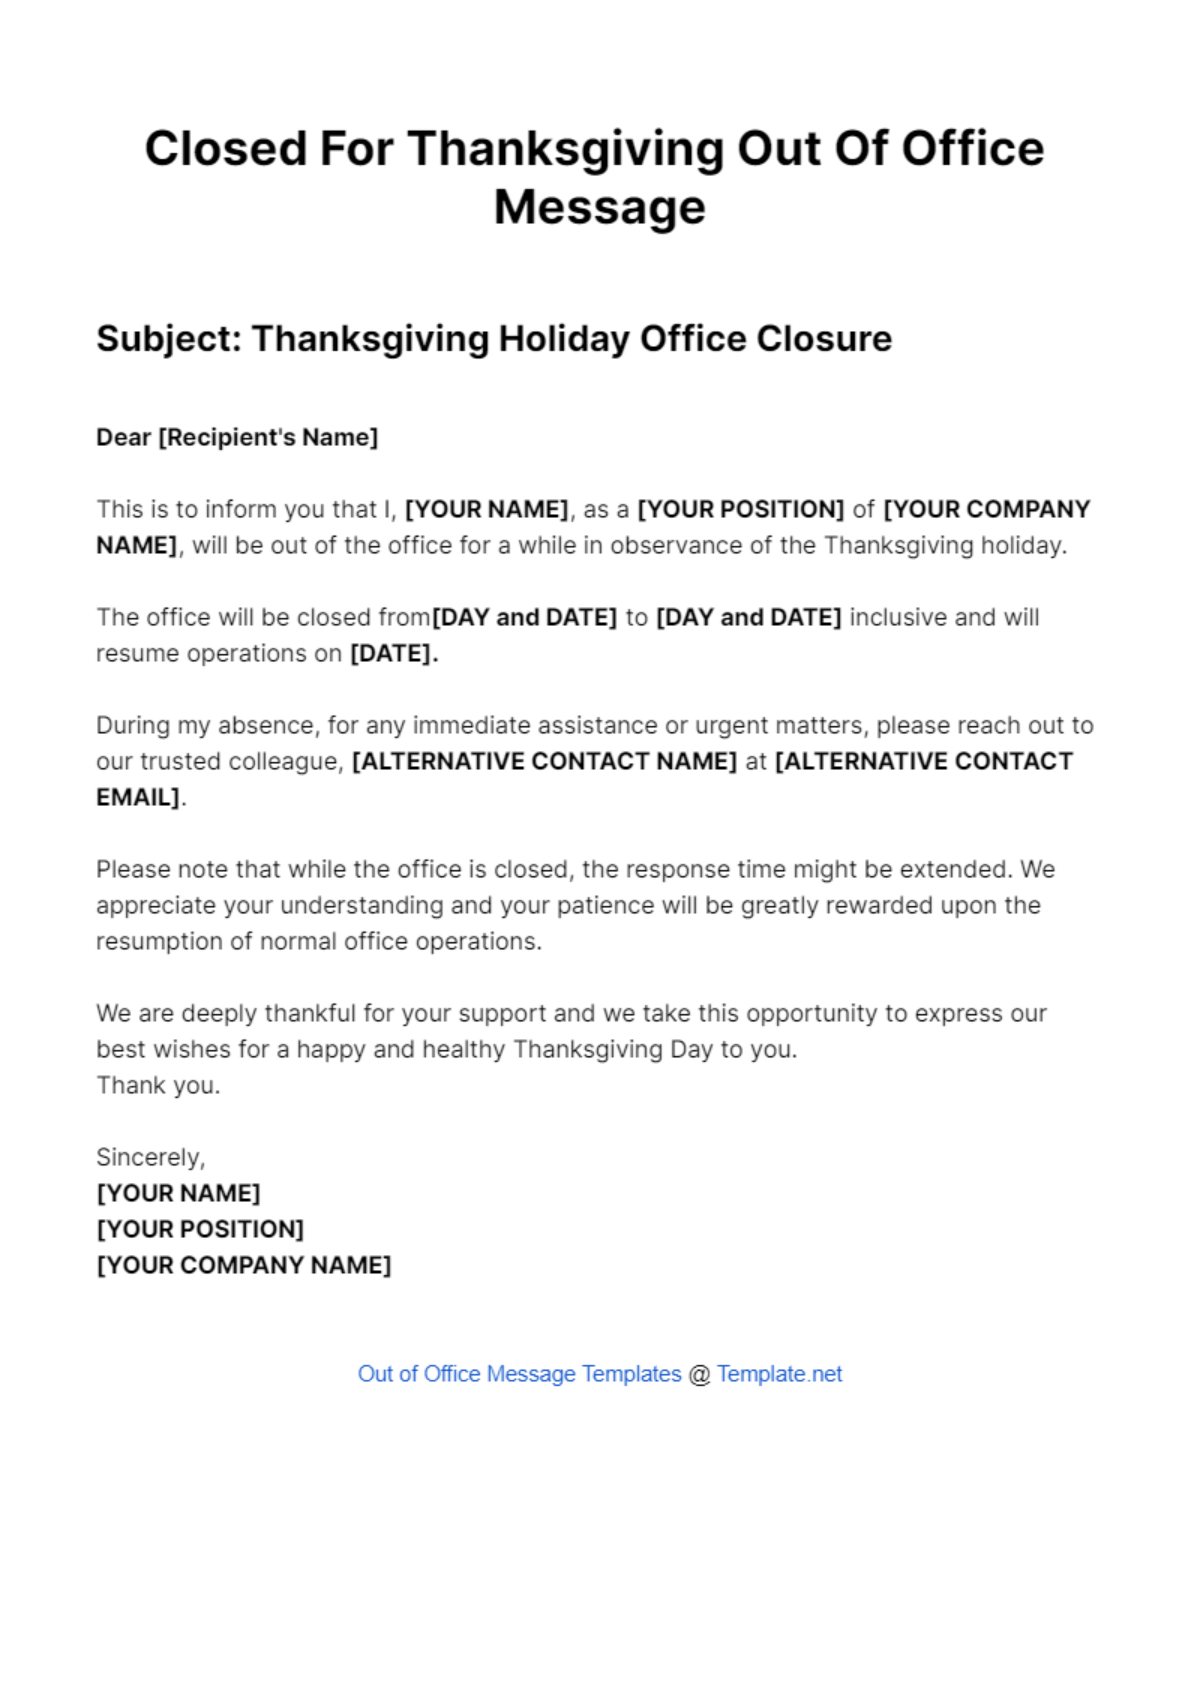 Free Closed For Thanksgiving Out Of Office Message Template